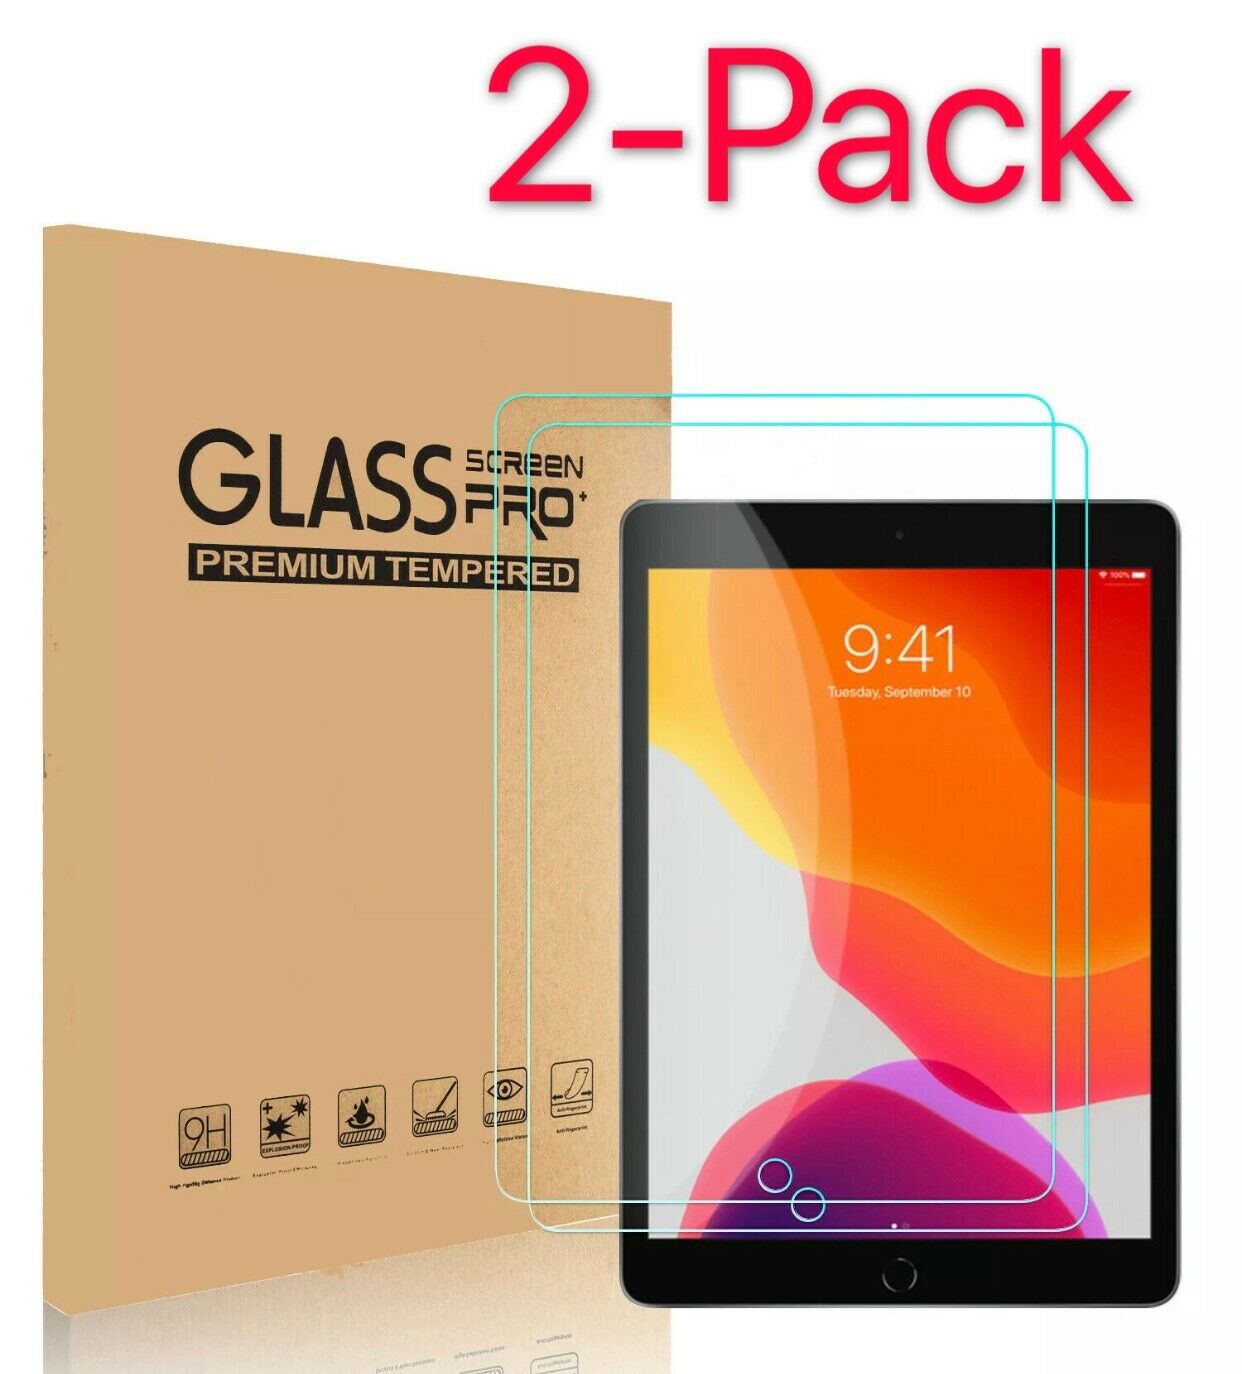 2-pack Tempered Glass Screen Protector Cover For Ipad 10.2 Inch 2019 7th Gen Hd